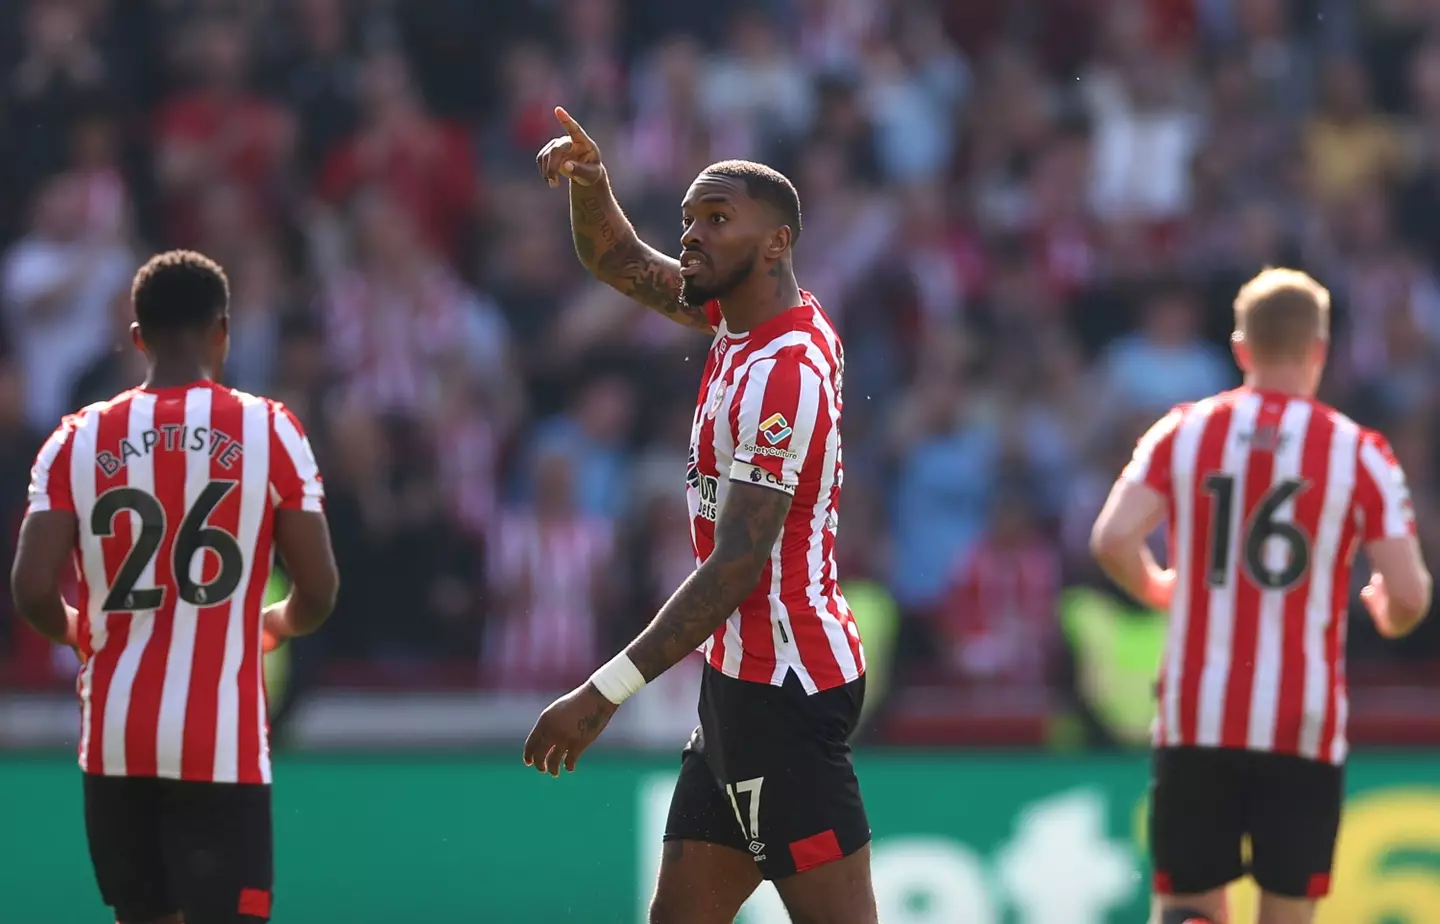 Ivan Toney in action for Brentford. Image: Getty 